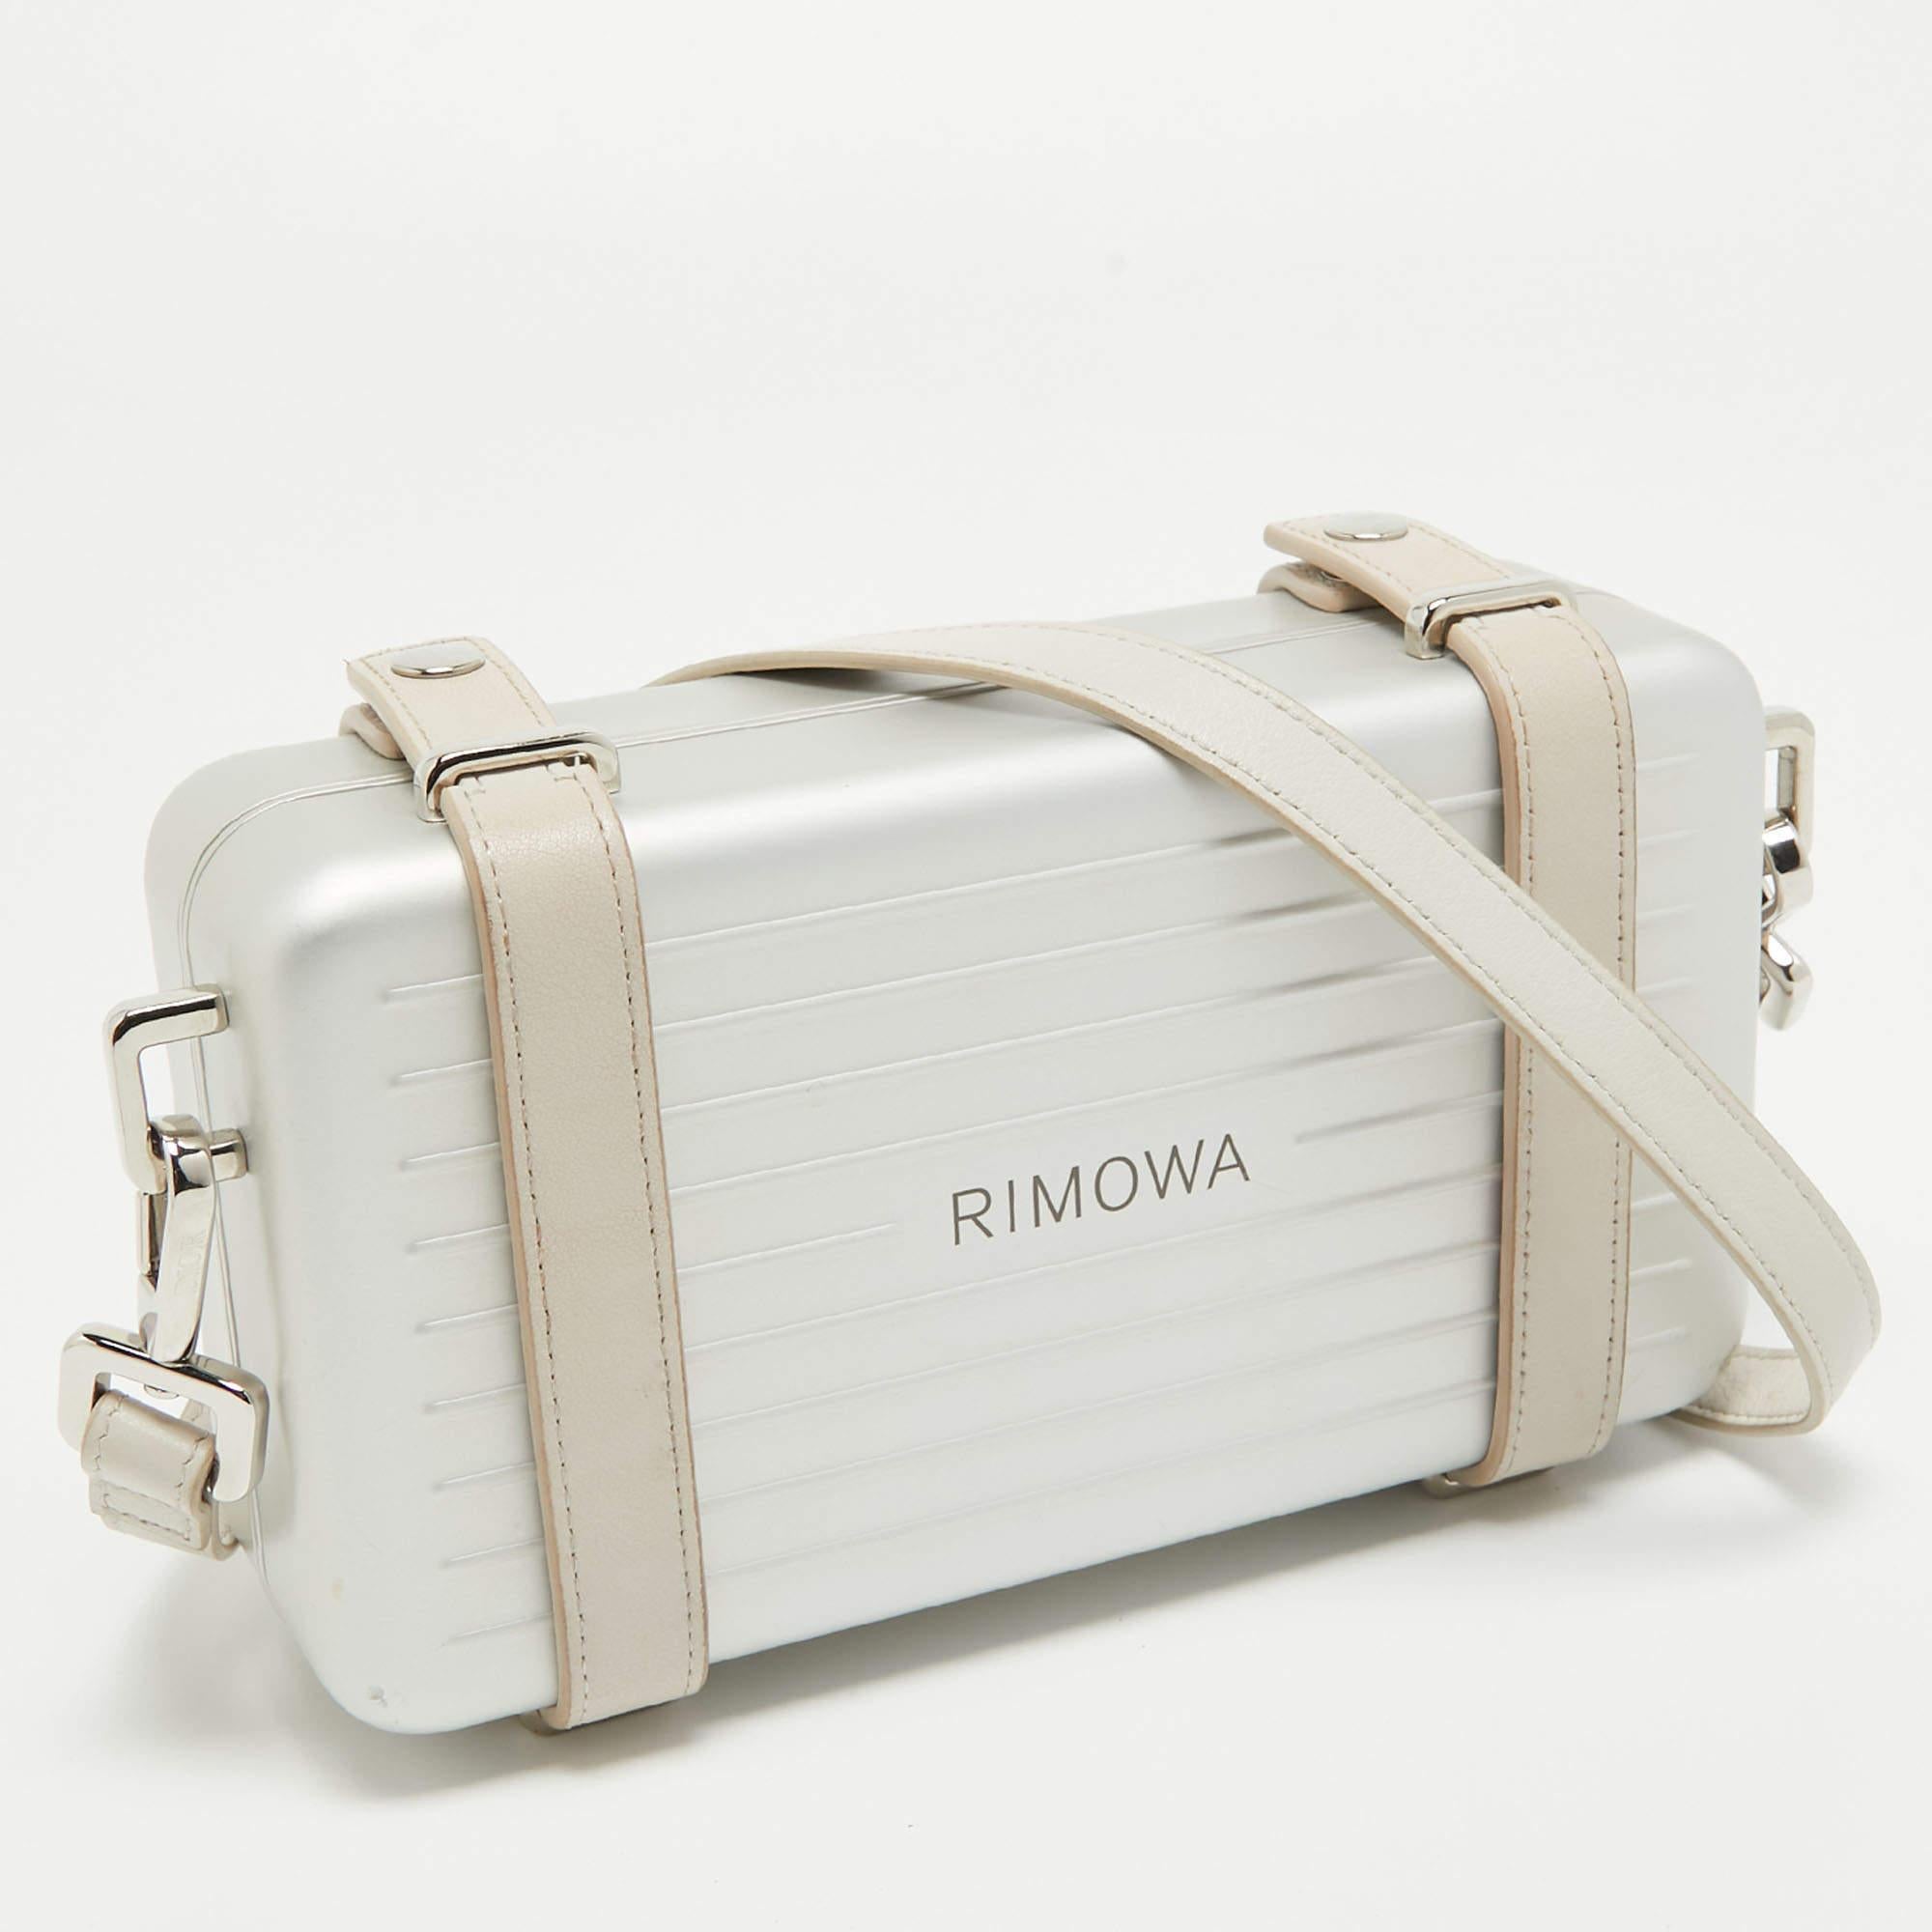 Dior x Rimowa Off White/Grey Aluminum and Leather Personal Clutch Bag 2